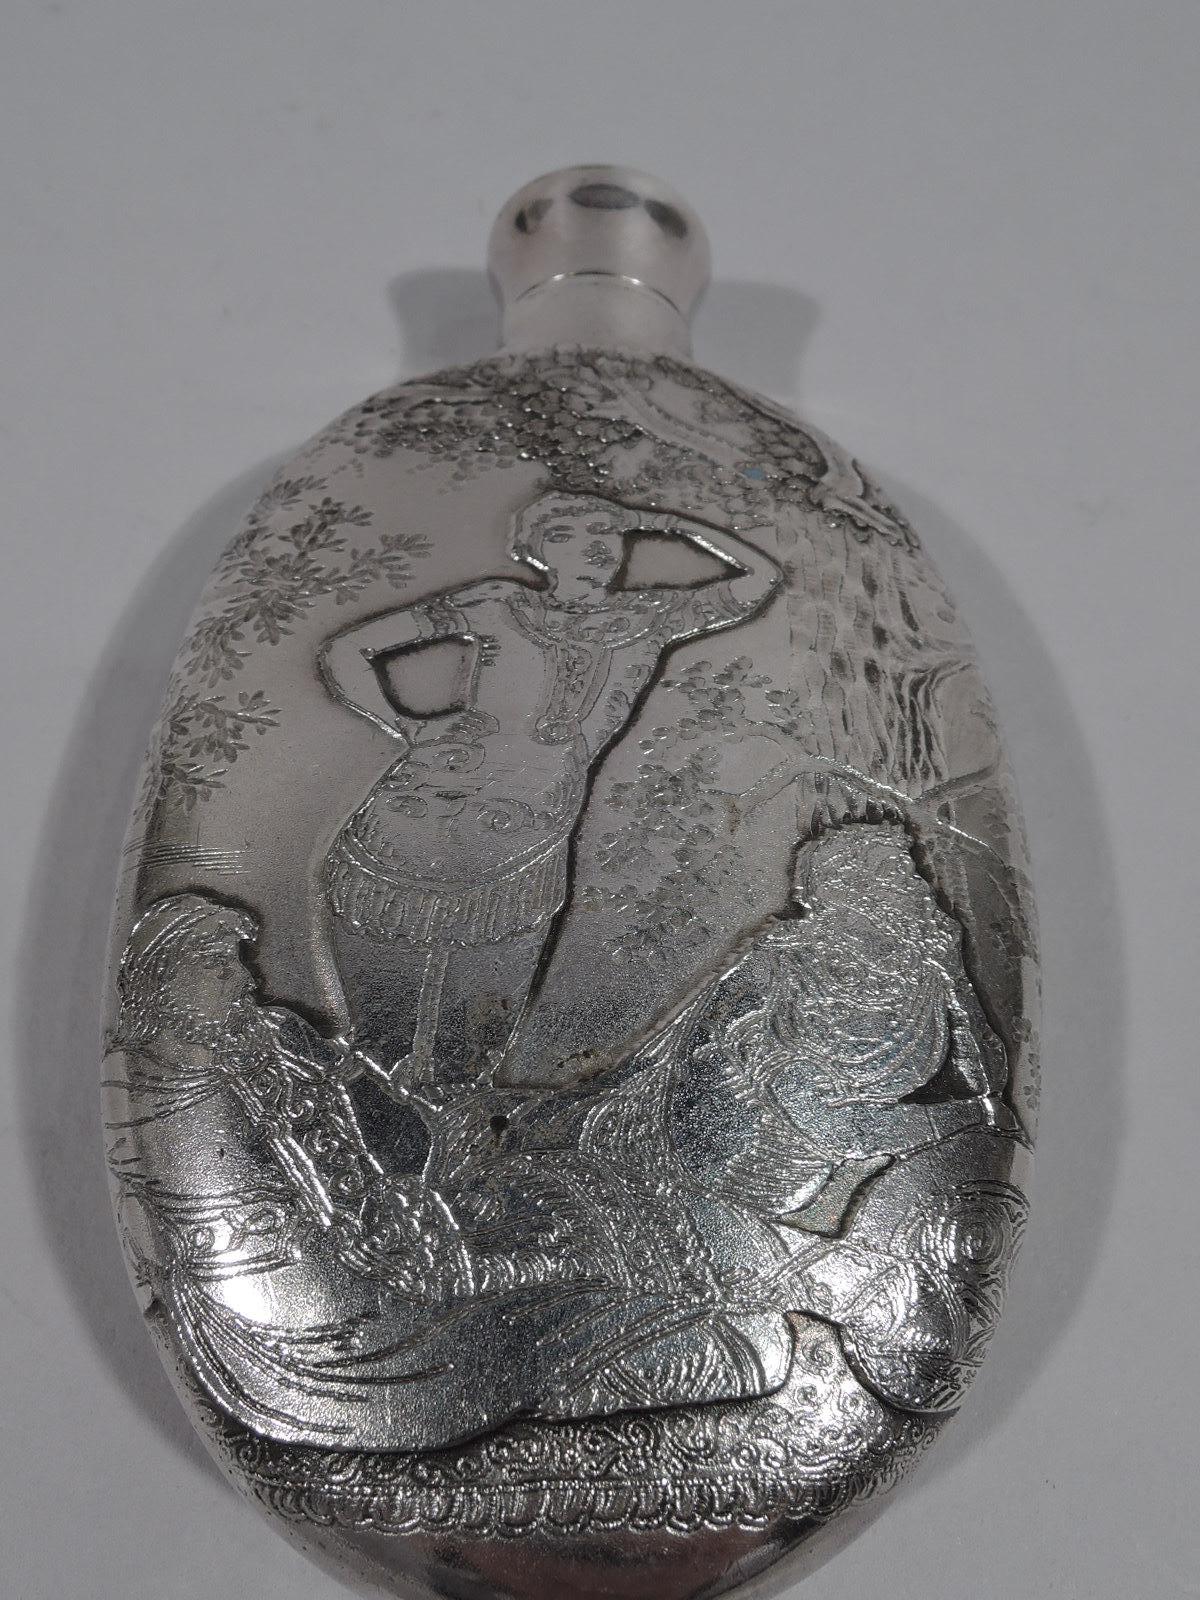 Classical sterling silver flask. Retailed by Tiffany & Co. in New York, circa 1890. Oval with threaded cover. Double sided acid-etched scene of thoughtful tunic-clad men. A dollop of Greek philosophy to accompany the self-medication. Small size